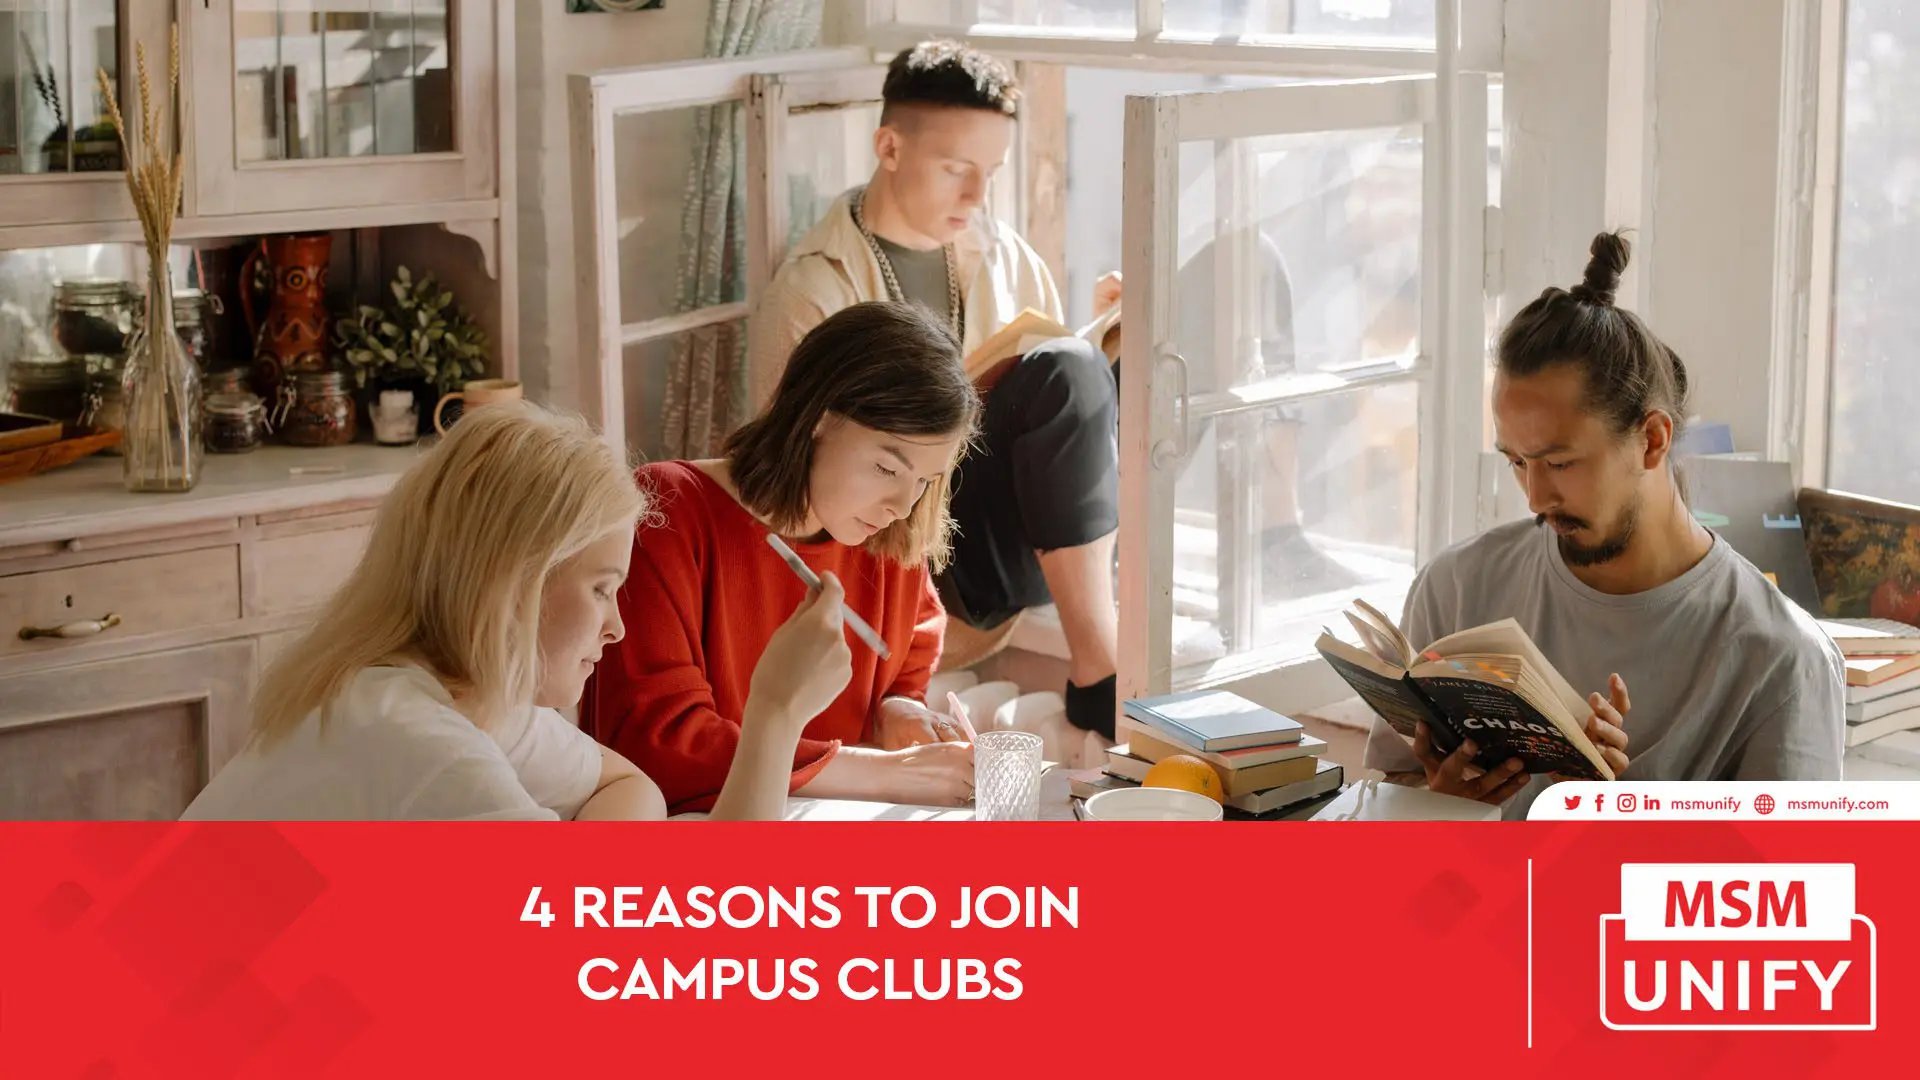 MSM Unify  4 Reasons To Join Campus Clubs